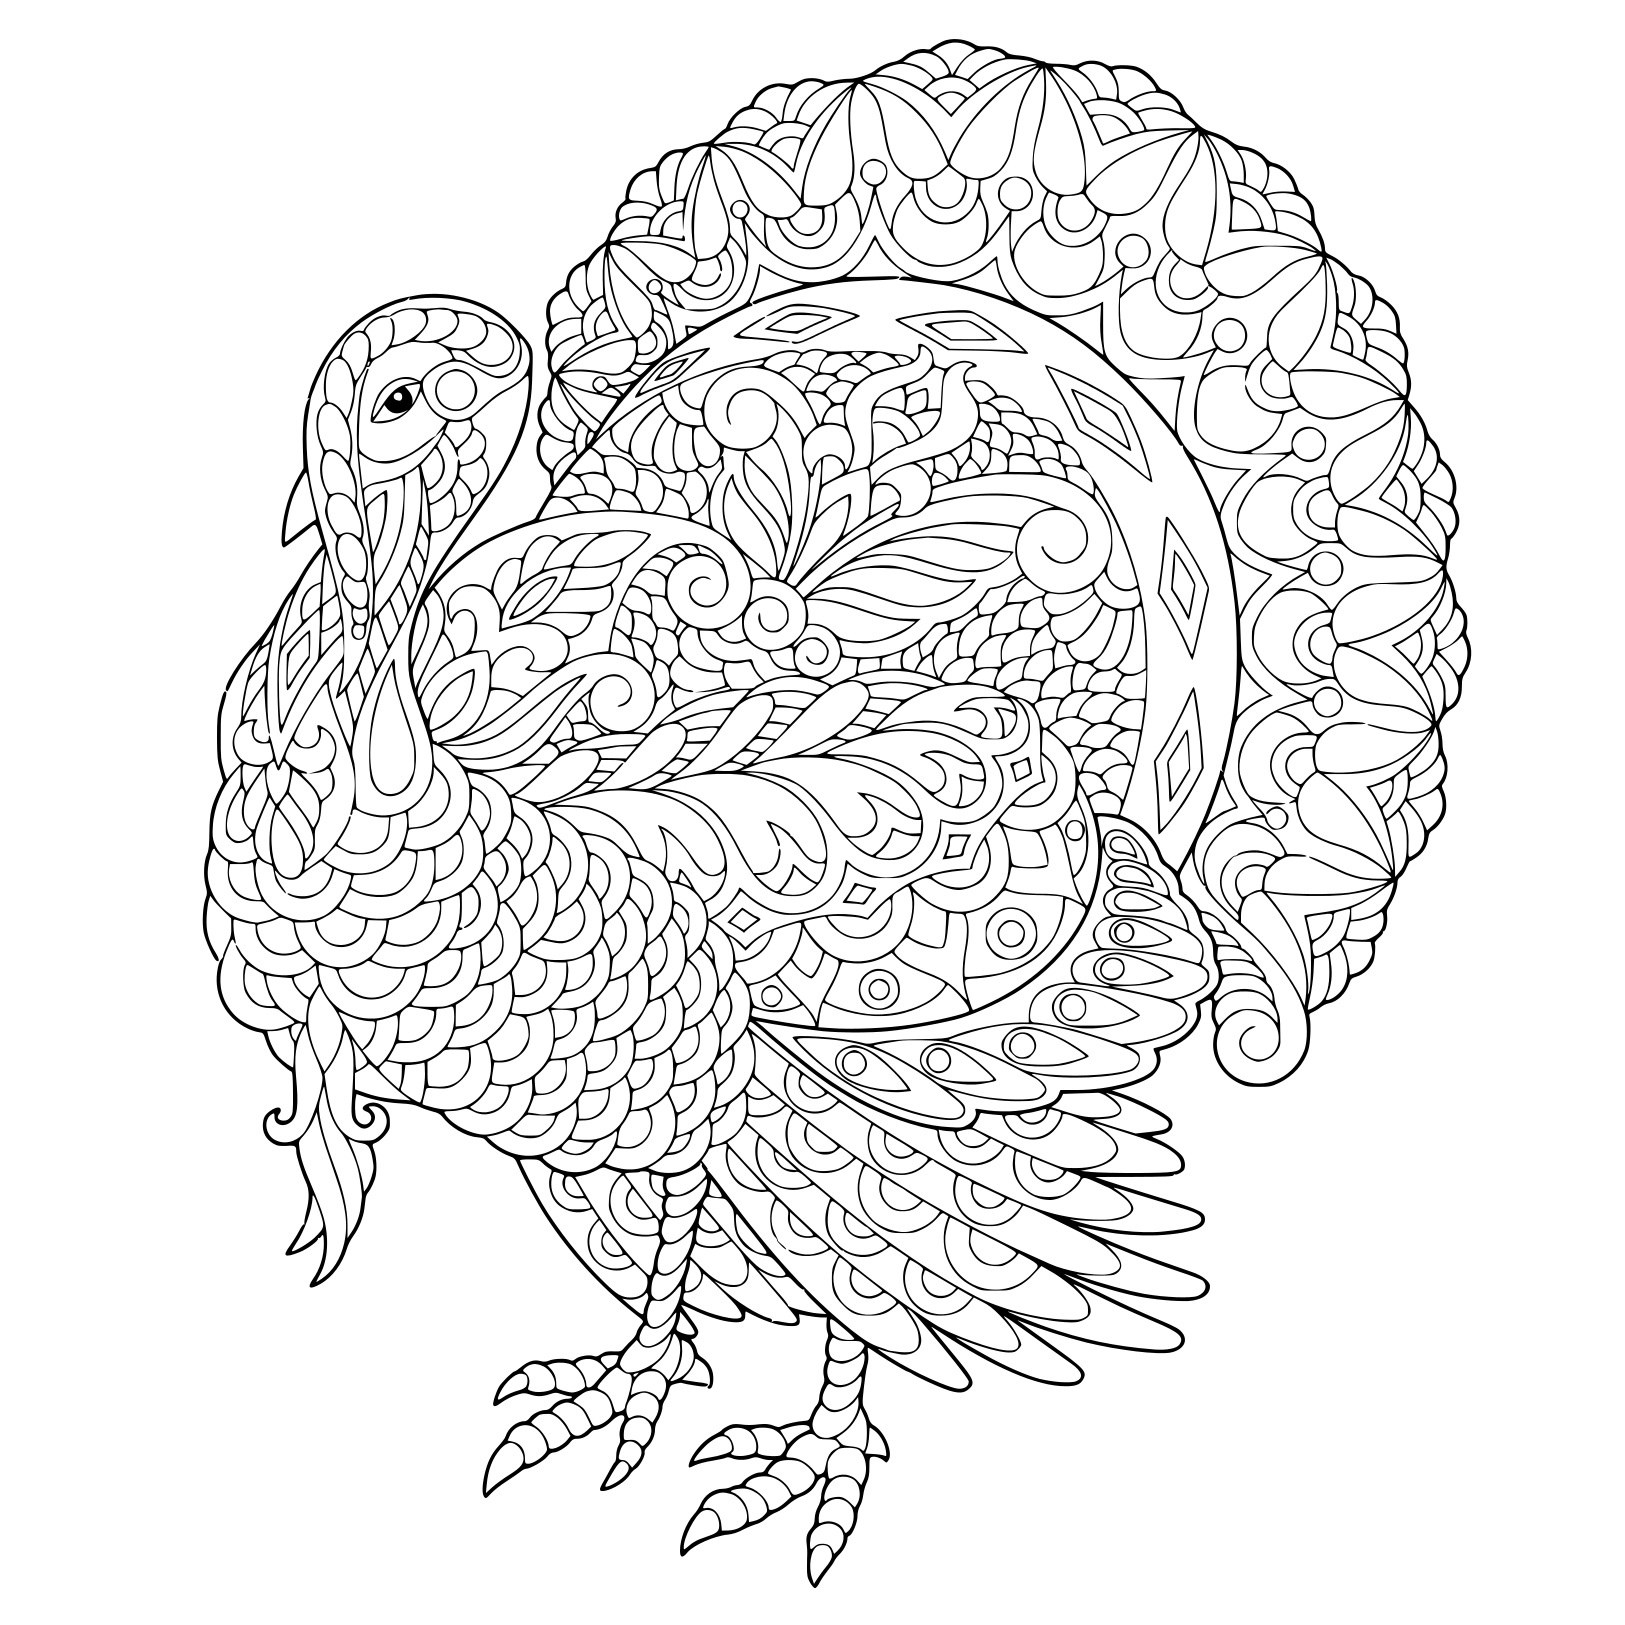 Turkey For Thanksgiving Day Greeting Adult Zentangle Coloring Page